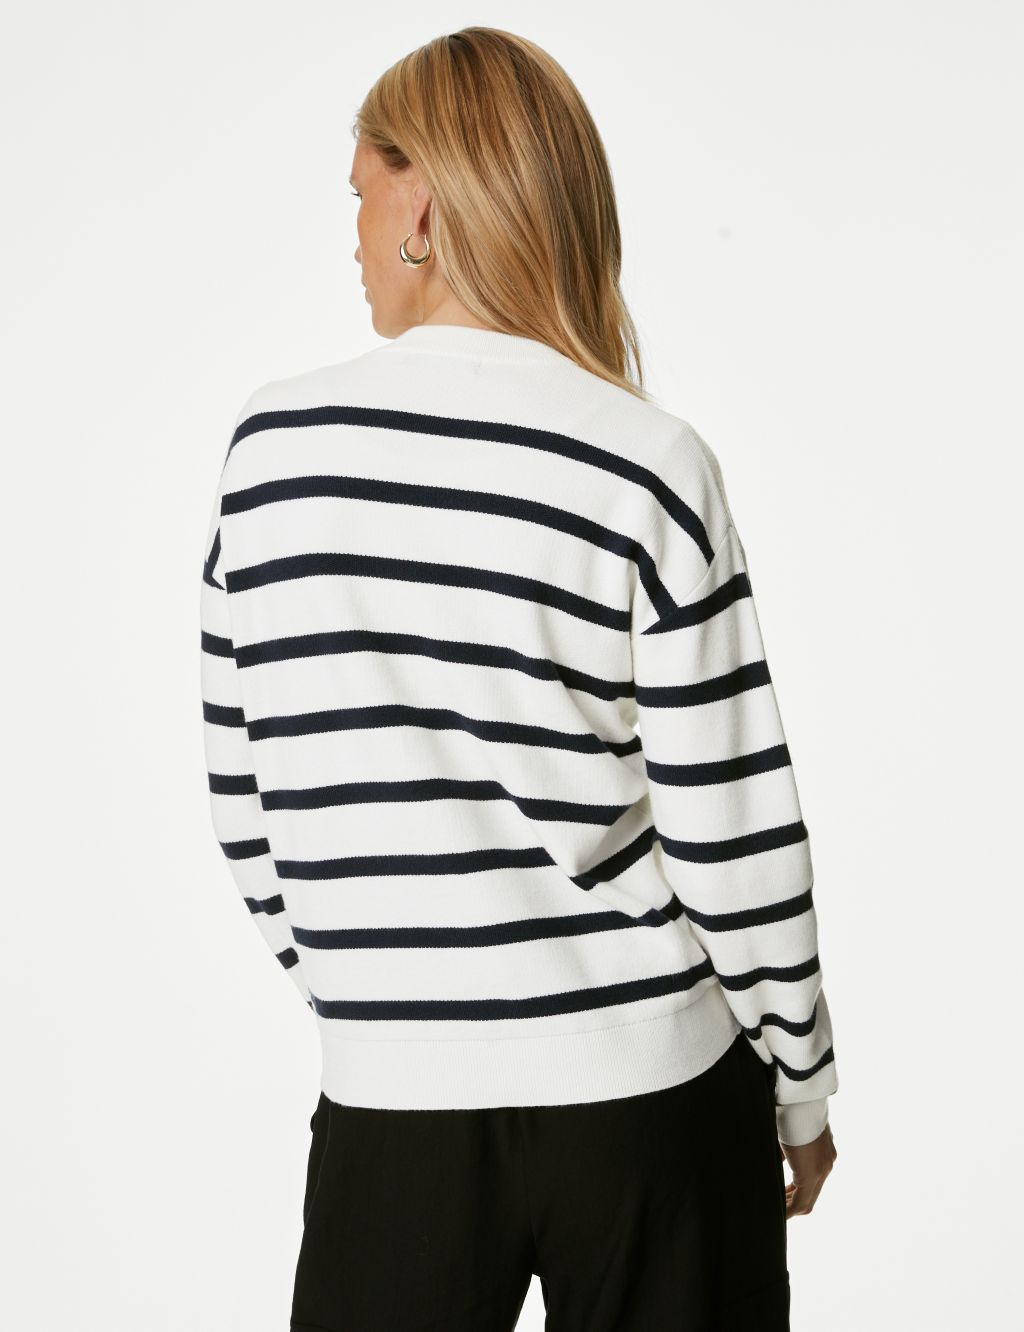 Soft Touch Striped Crew Neck Jumper image 5